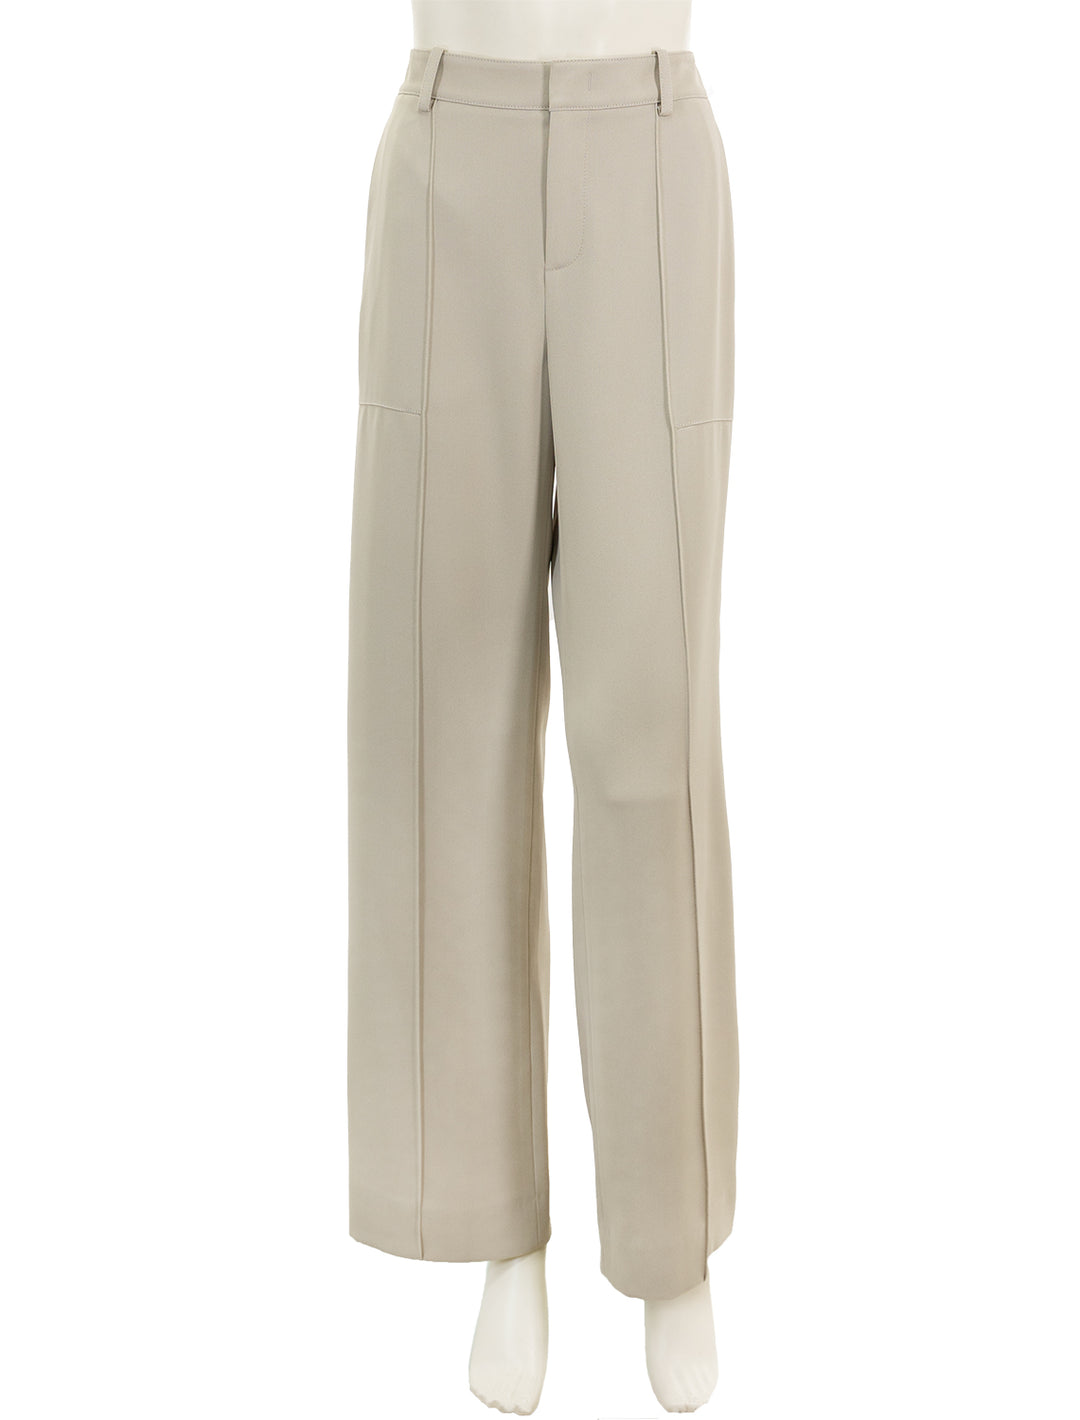 Front view of Vince's crepe wide leg utility pant in sepia.